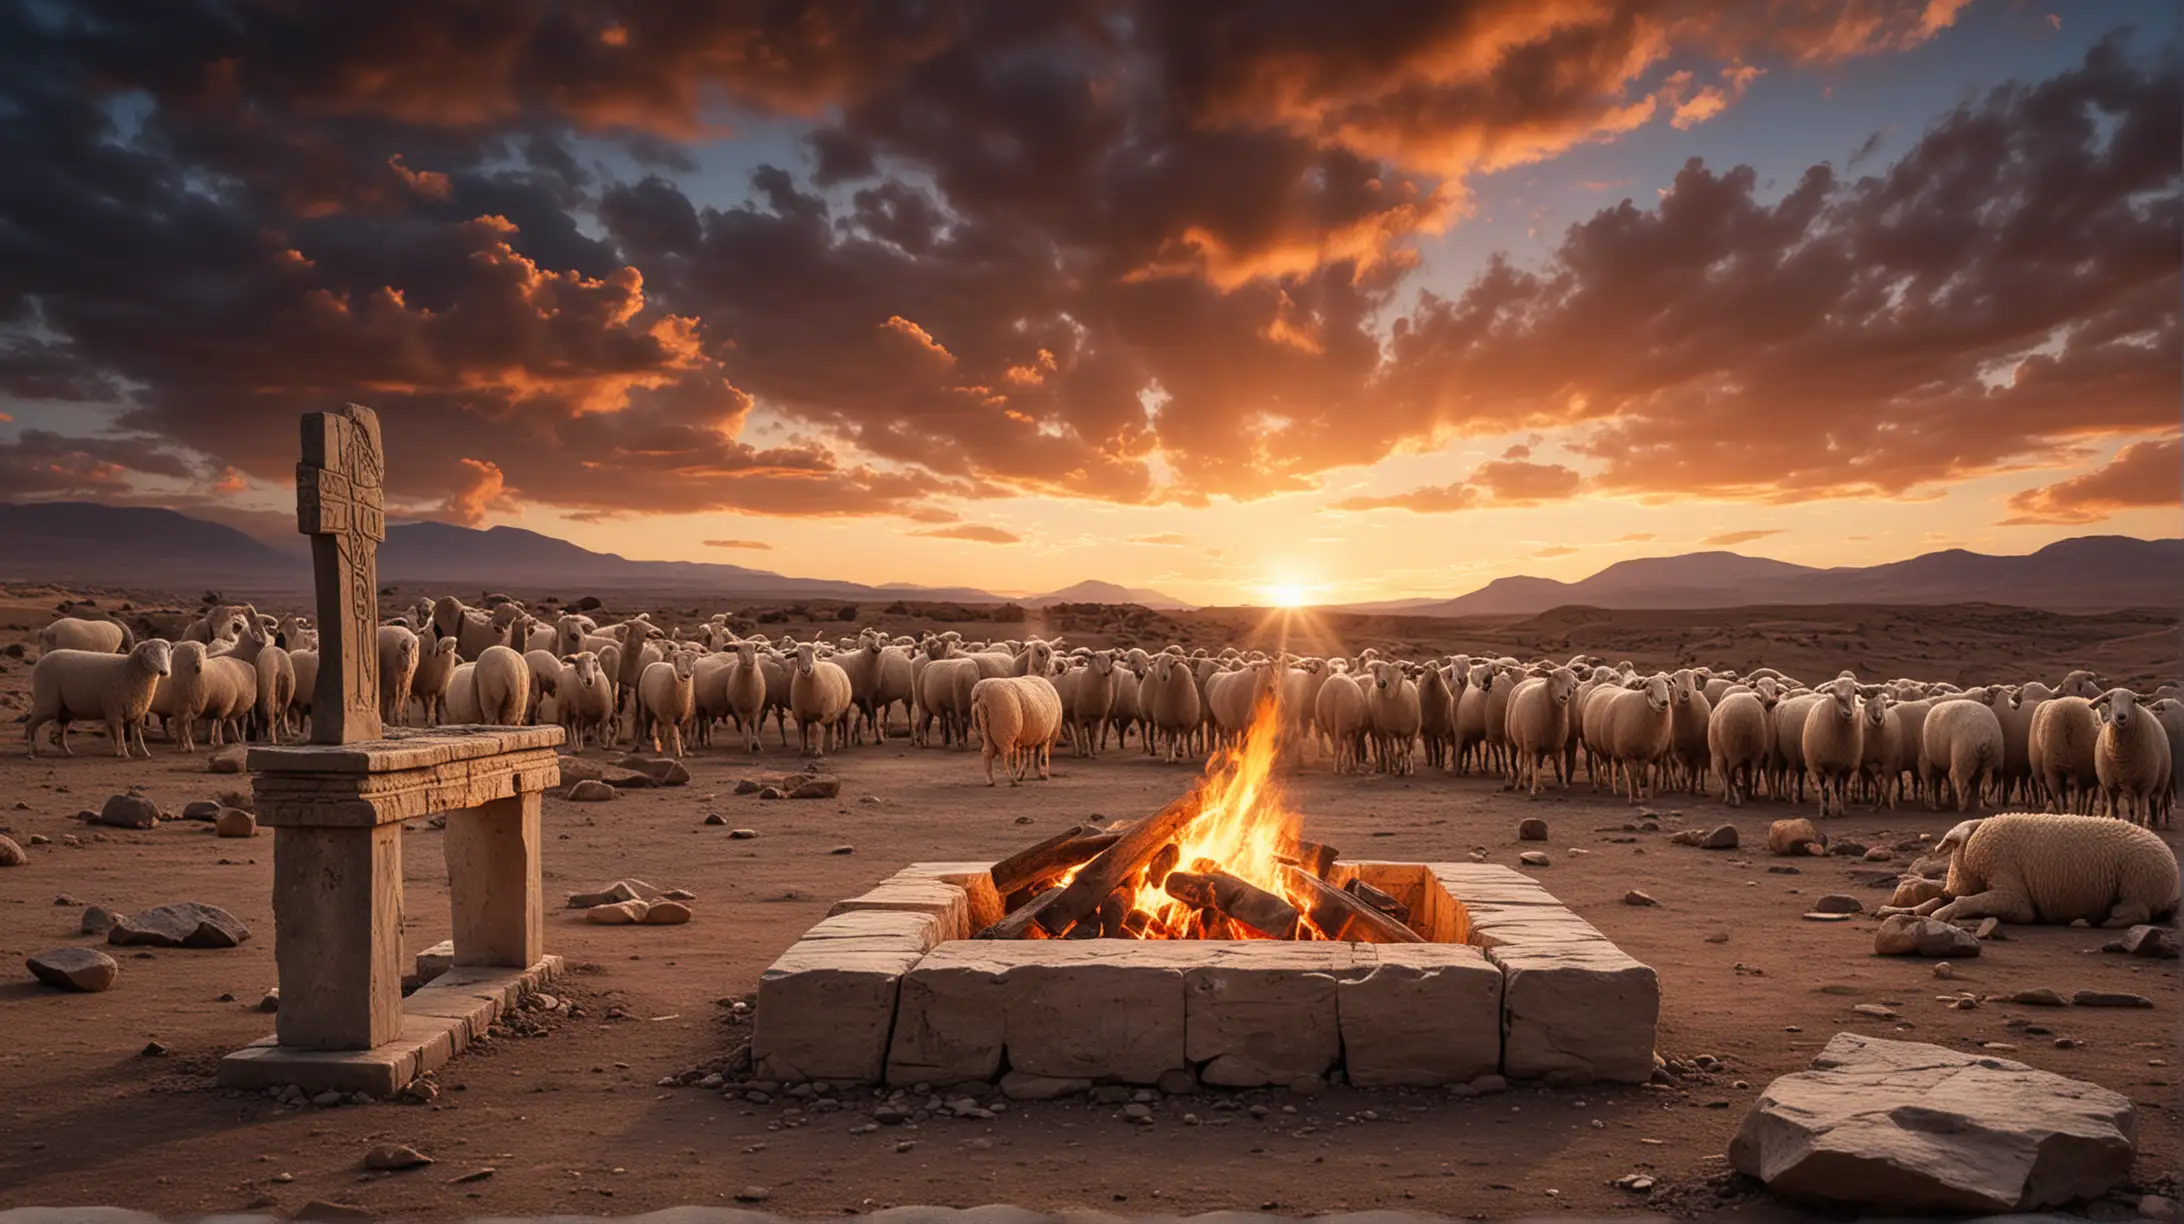 A close up of  a  stone  sacrificial altar, with a fire lit to do burnt sacrifices.  Set in a desert location,  with some rams, and sheep in the distance, with a magificent sky behind him, in the Era of the Biblcal Moses.